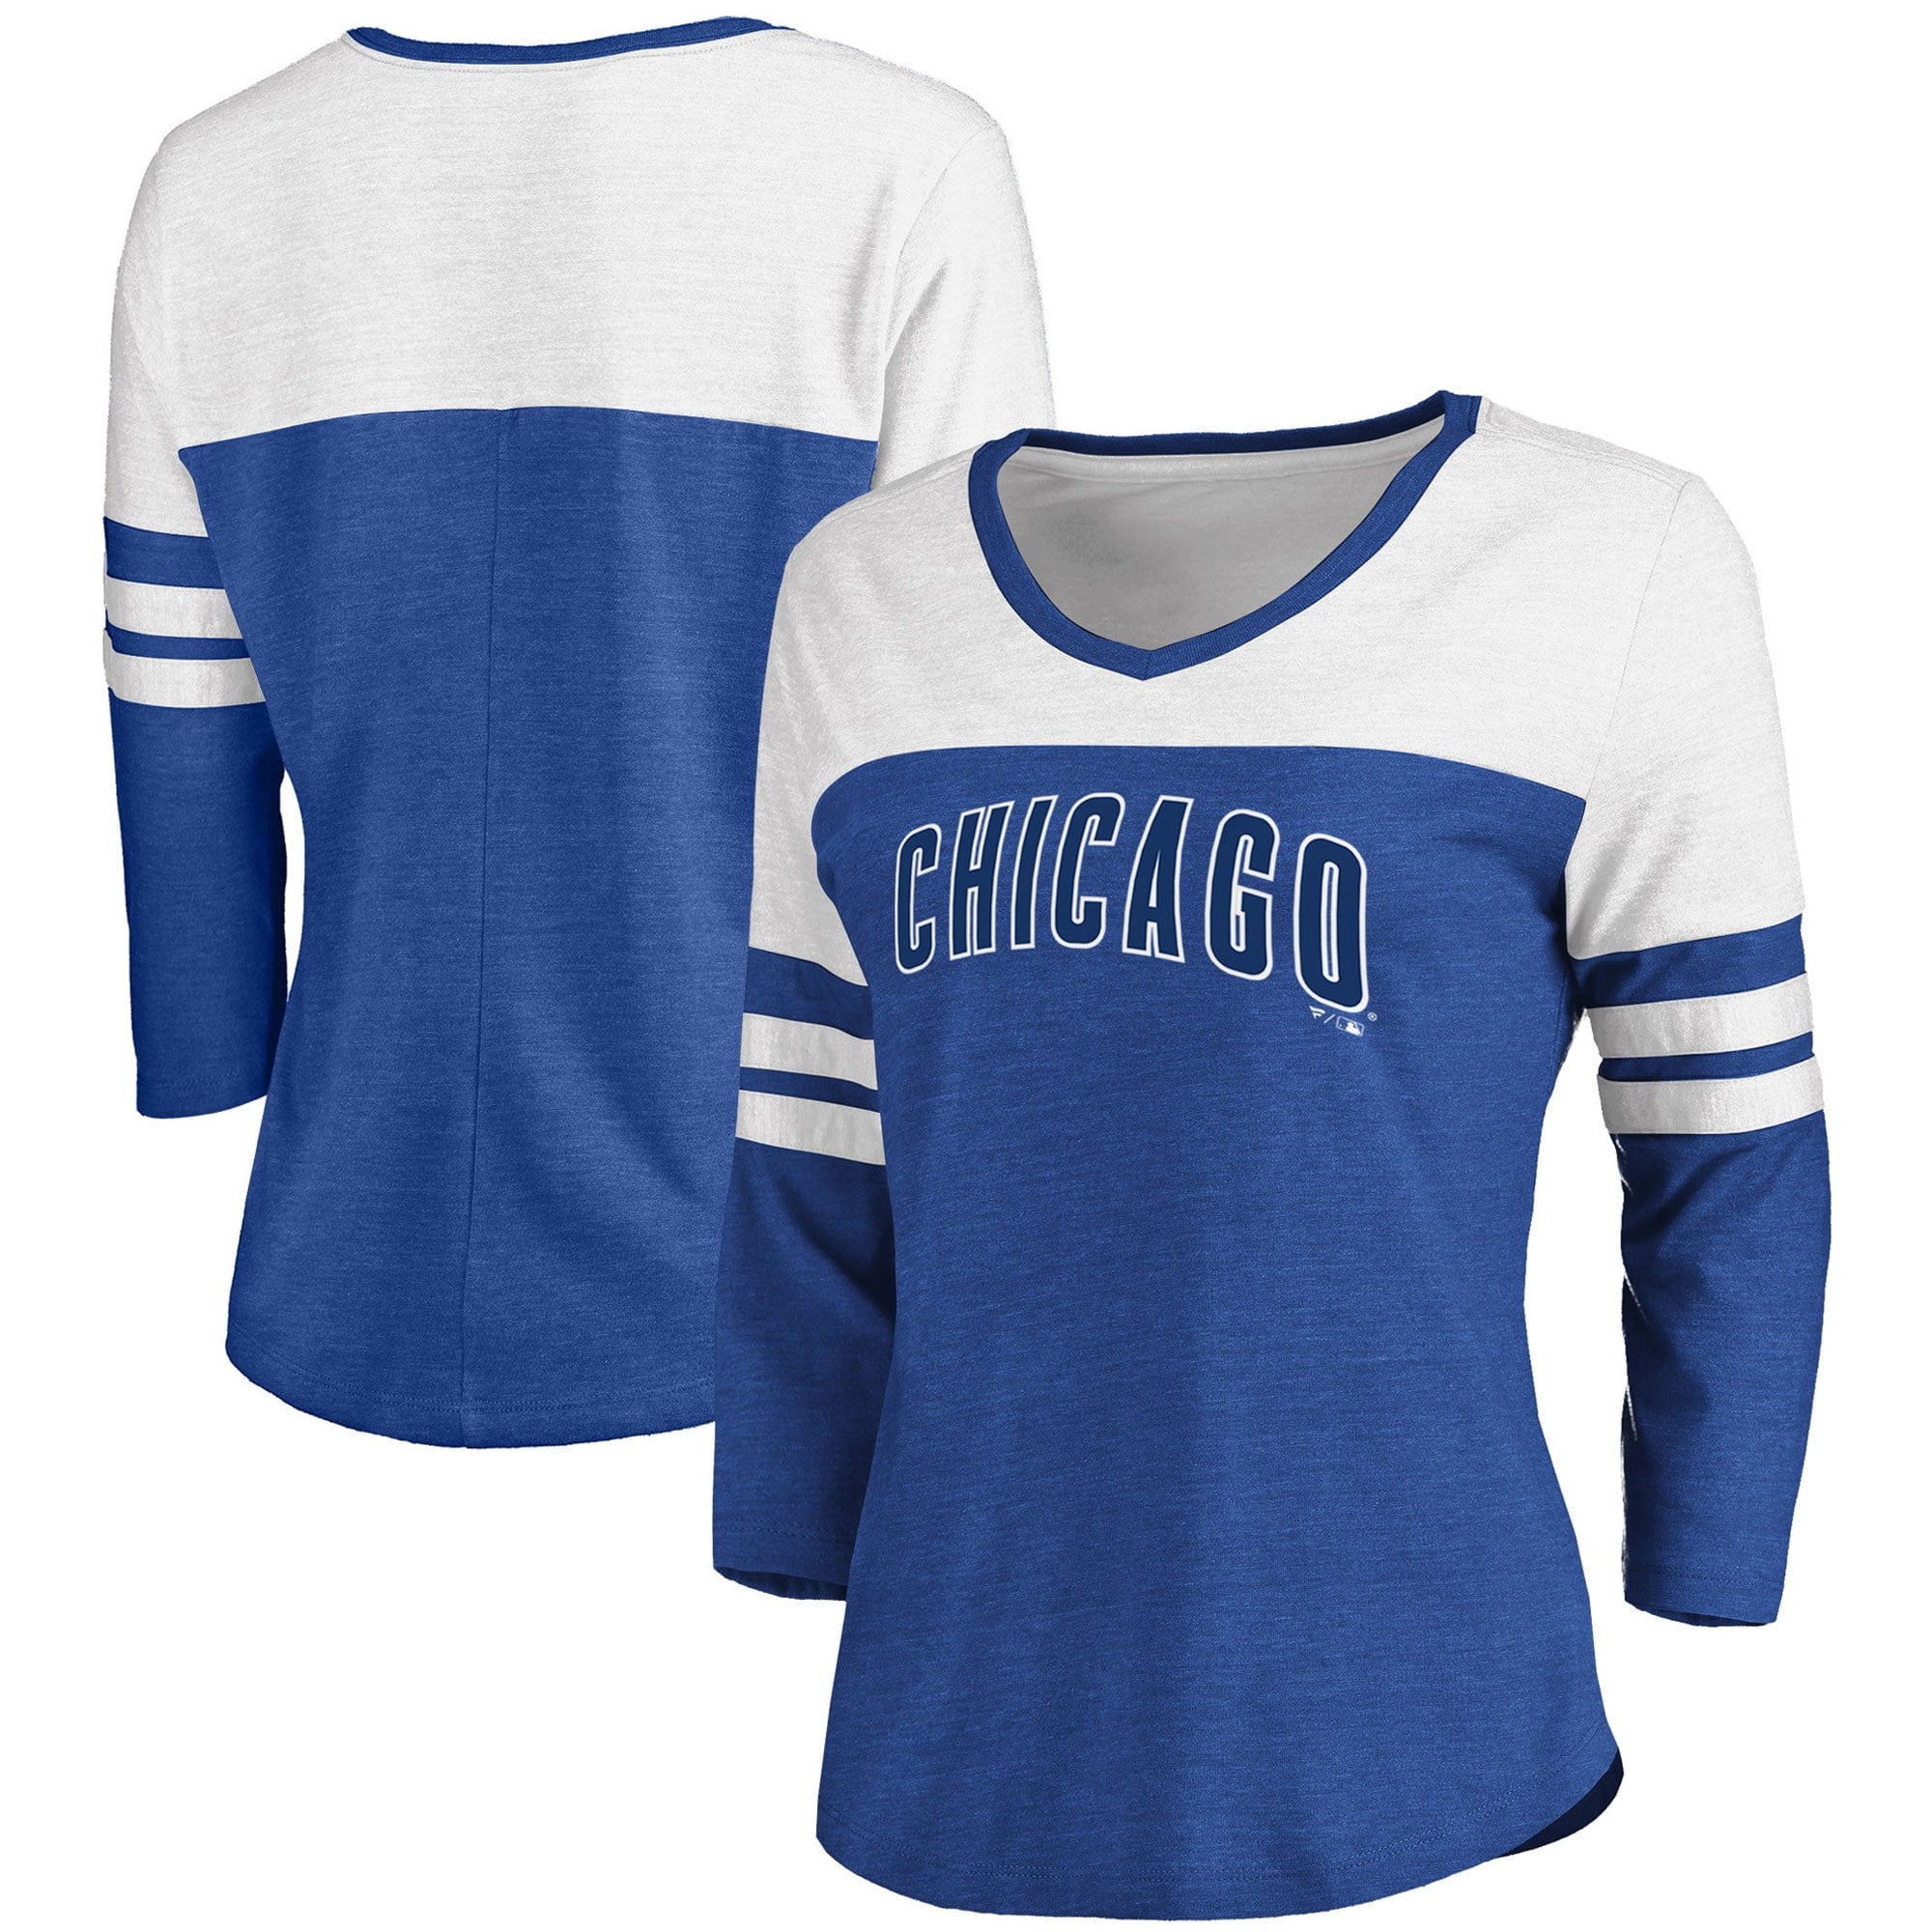 Women's Fanatics Branded Heathered Royal/White Chicago Cubs Official  Wordmark 3/4 Sleeve V-Neck T-Shirt 